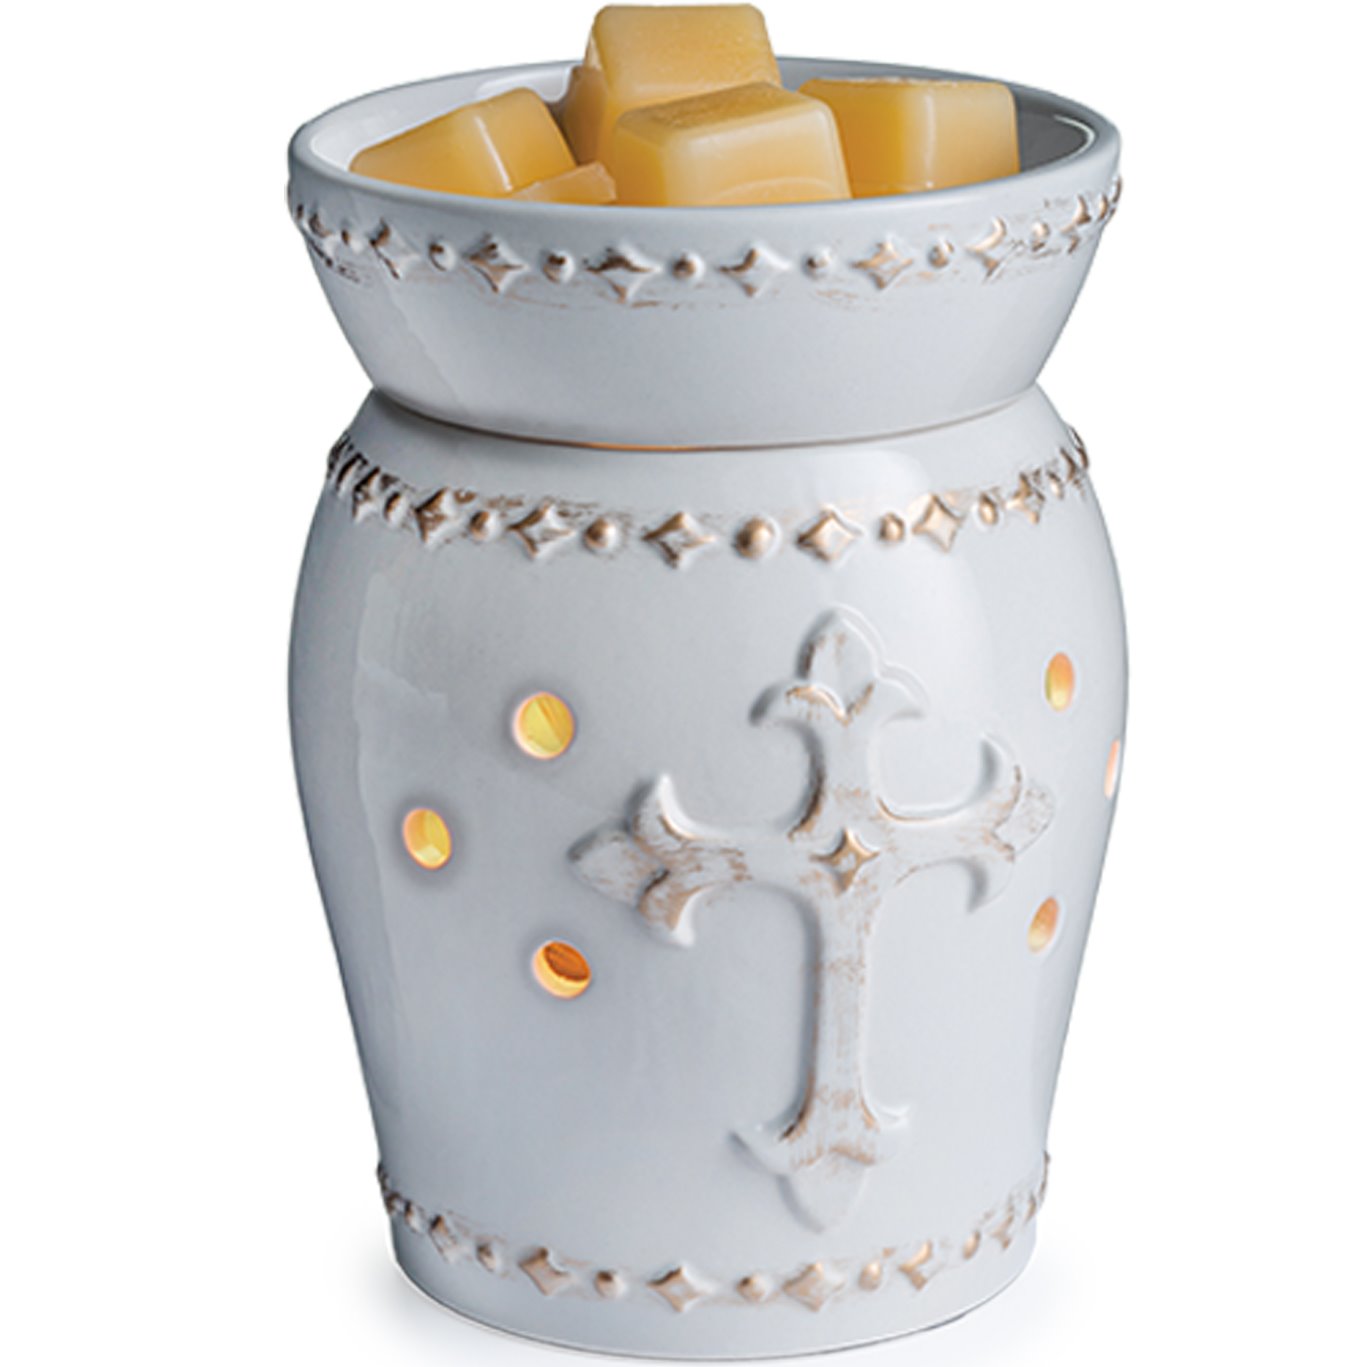 where to buy candle warmers